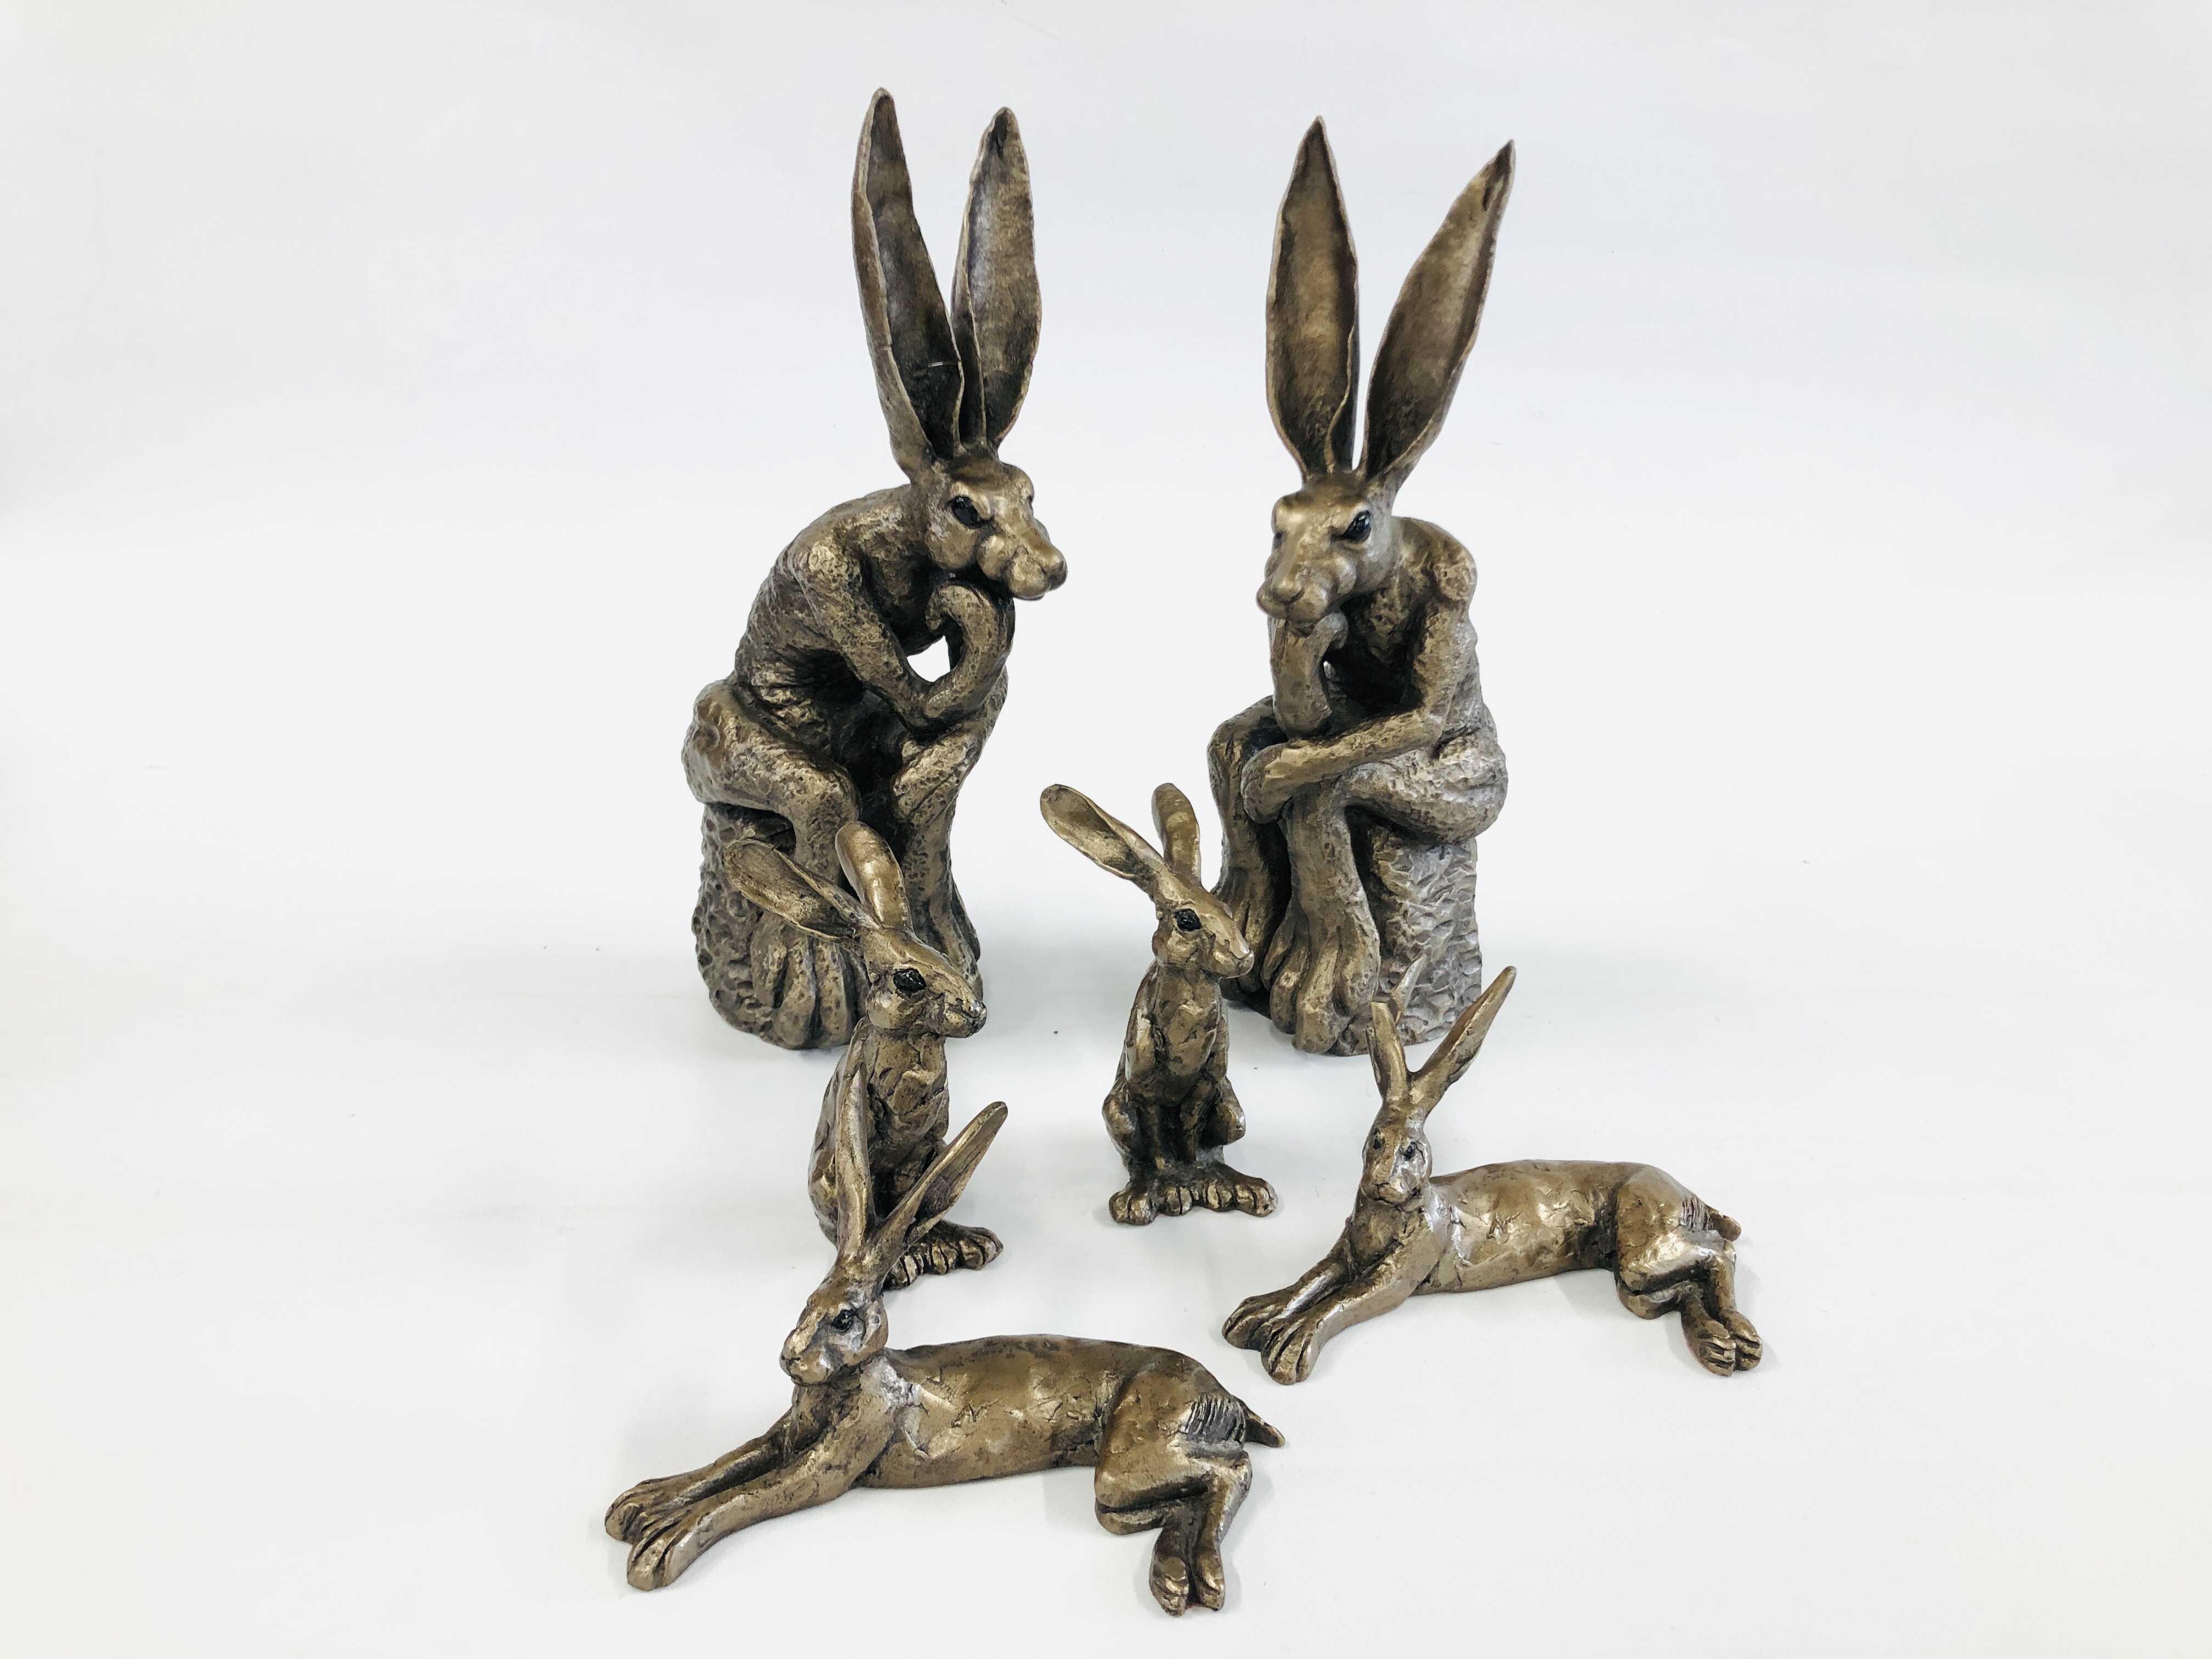 THREE PAIRS OF COMPOSITE HARE SCULPTURES BY "FRITH SCULPTURE" TO INCLUDE HARVEY HARE AND THE